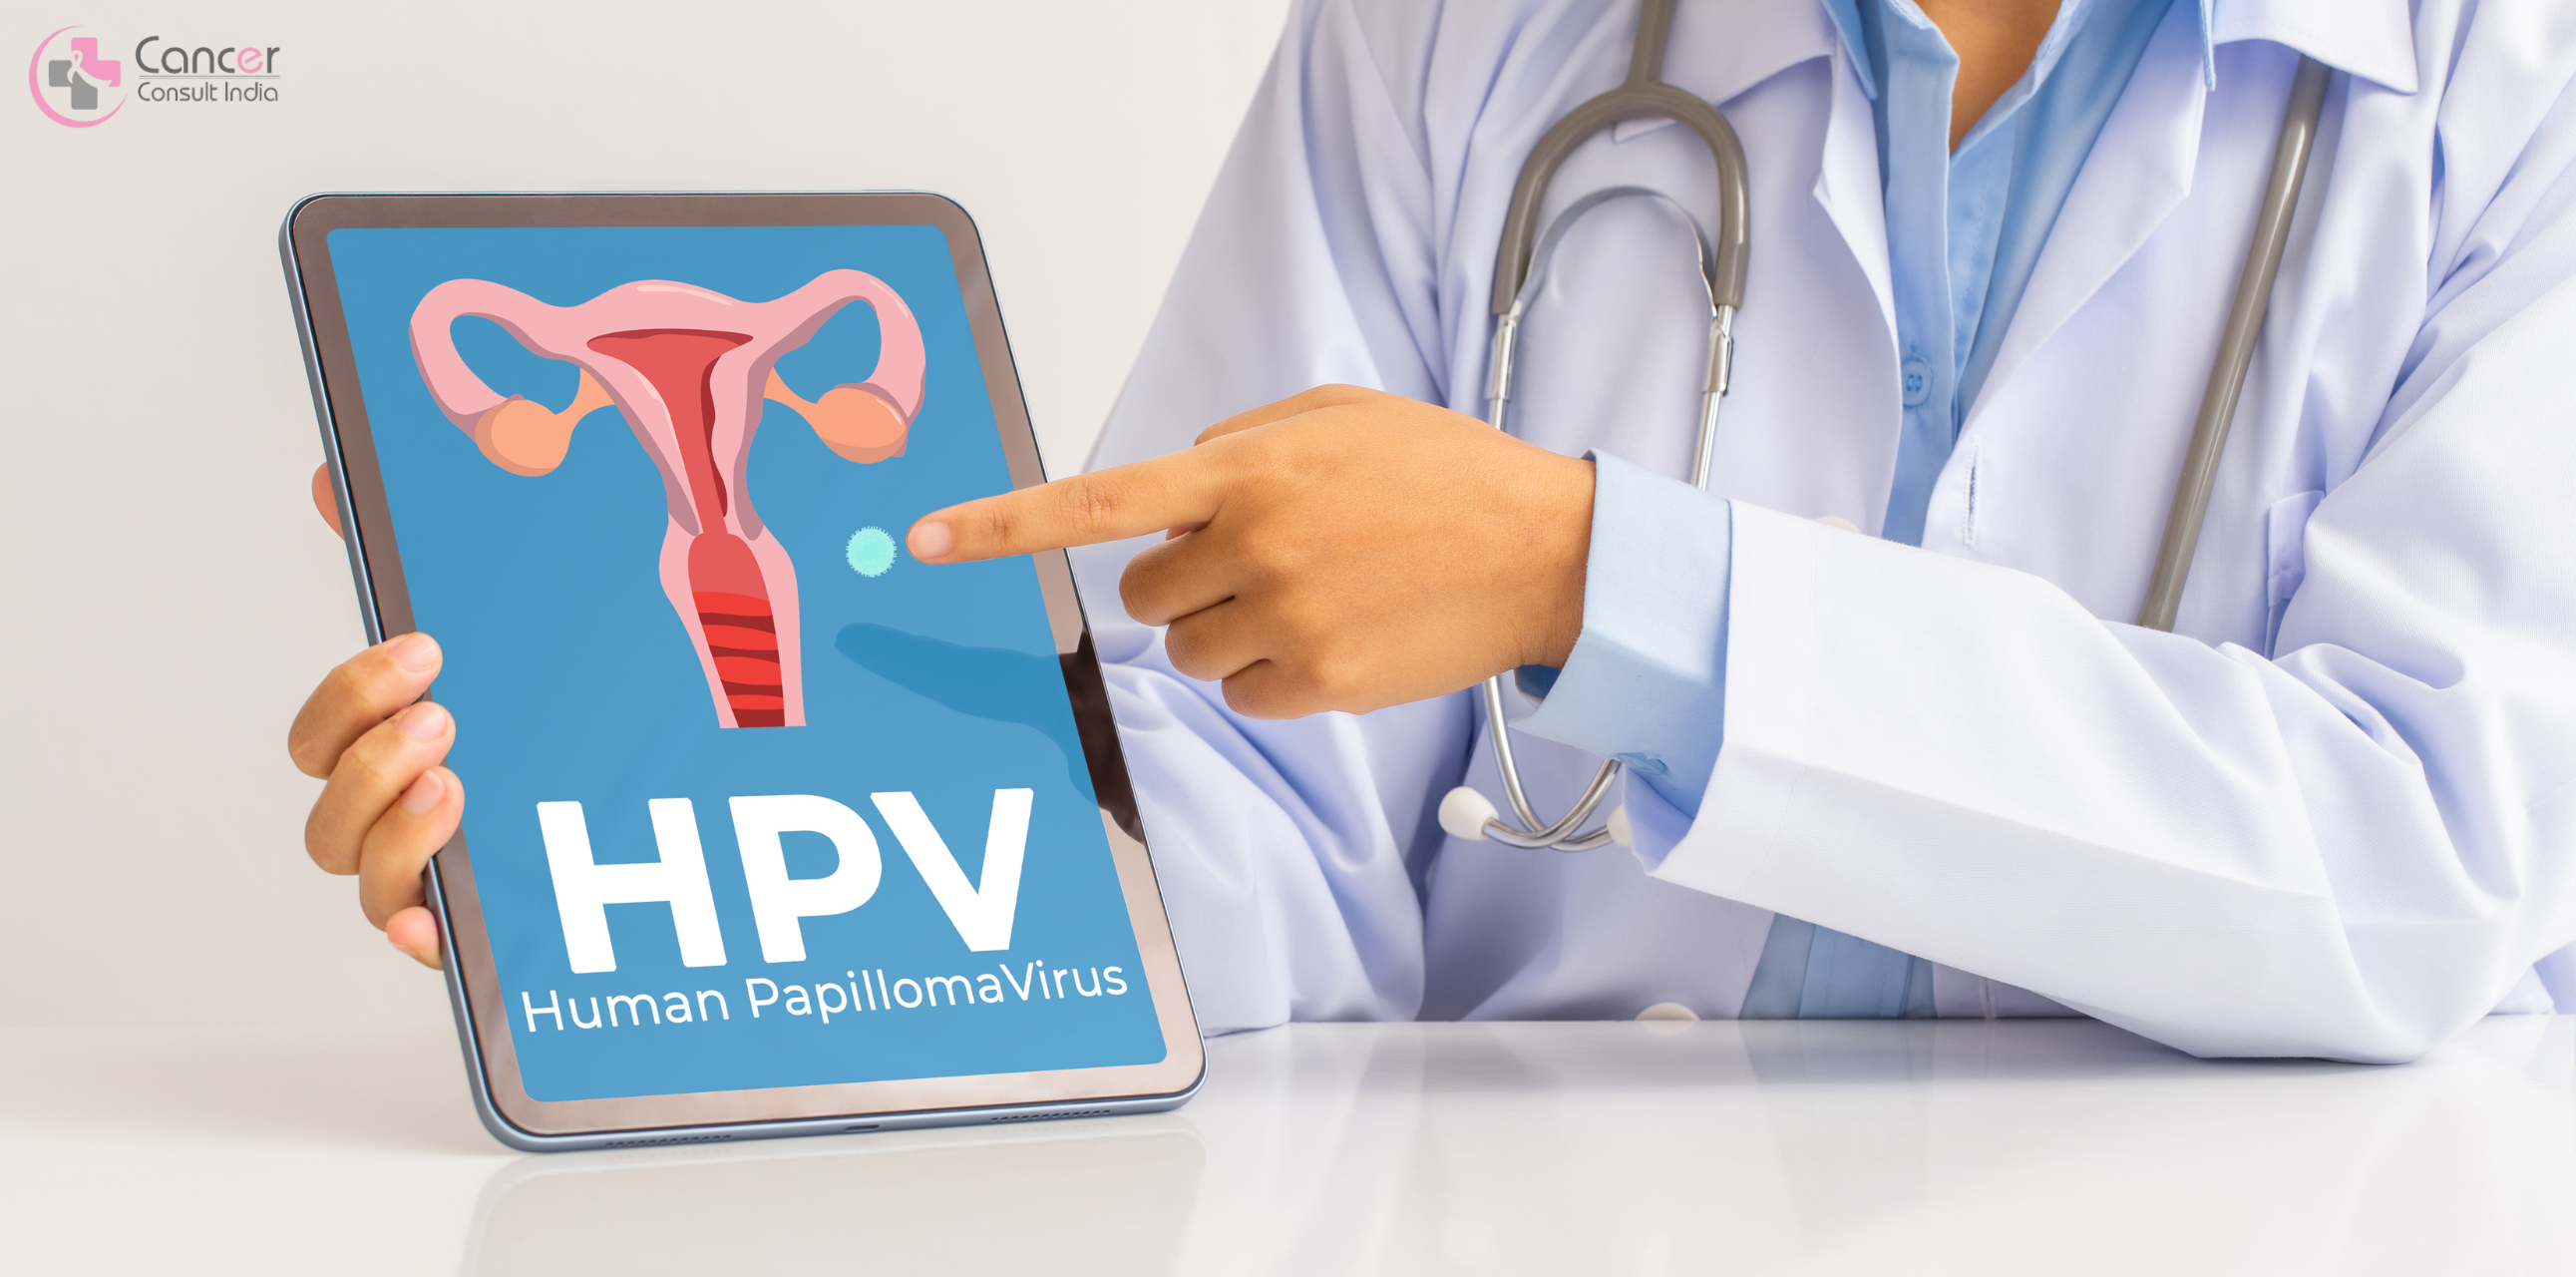 HPV Vaccination: Protecting Against Cervical Cancer and Other HPV-related Diseases